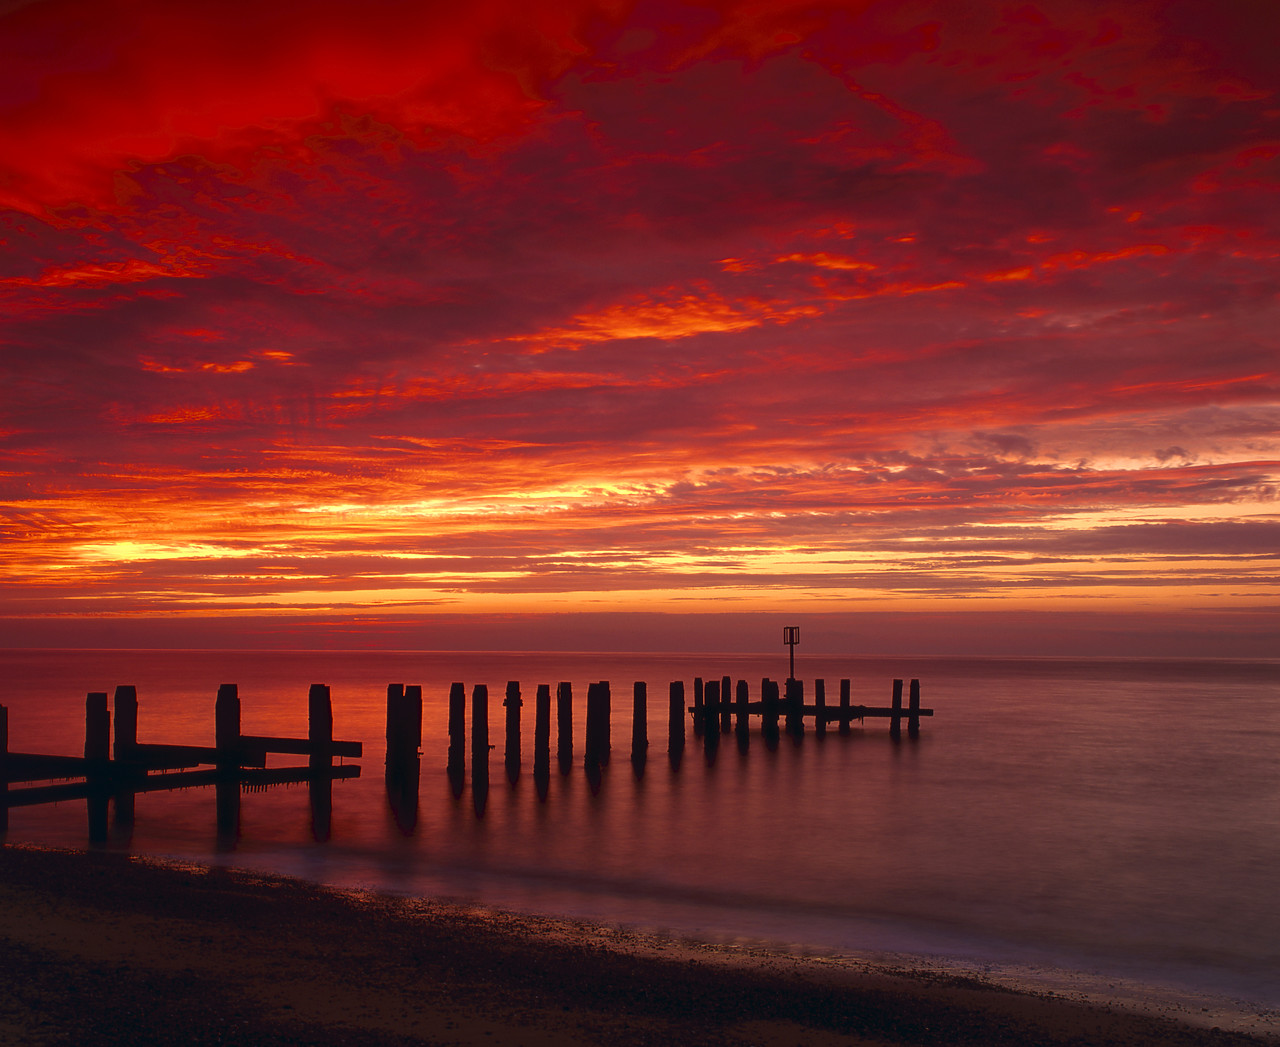 #010702-1 - Old Pier at Sunrise, Southwold, Suffolk, England